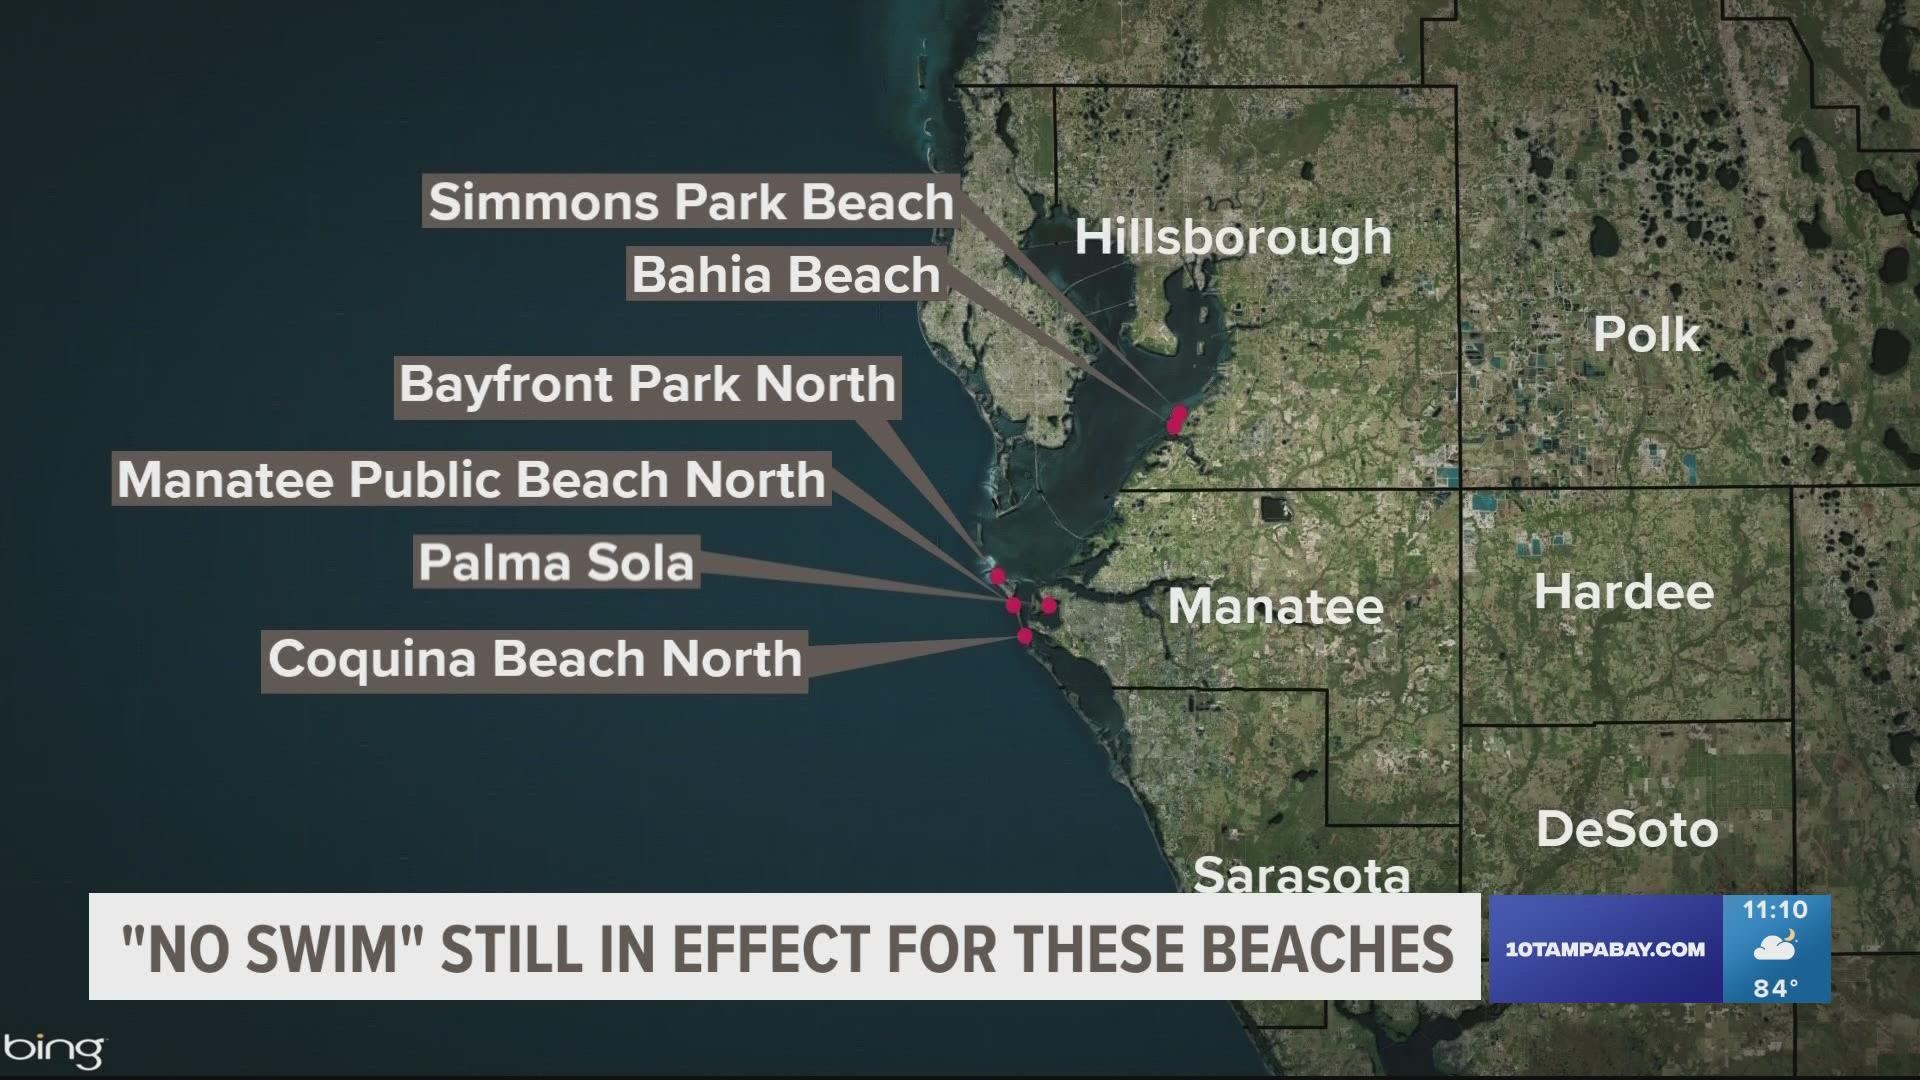 Beaches in Hillsborough and Manatee counties are still affected by high bacteria levels.